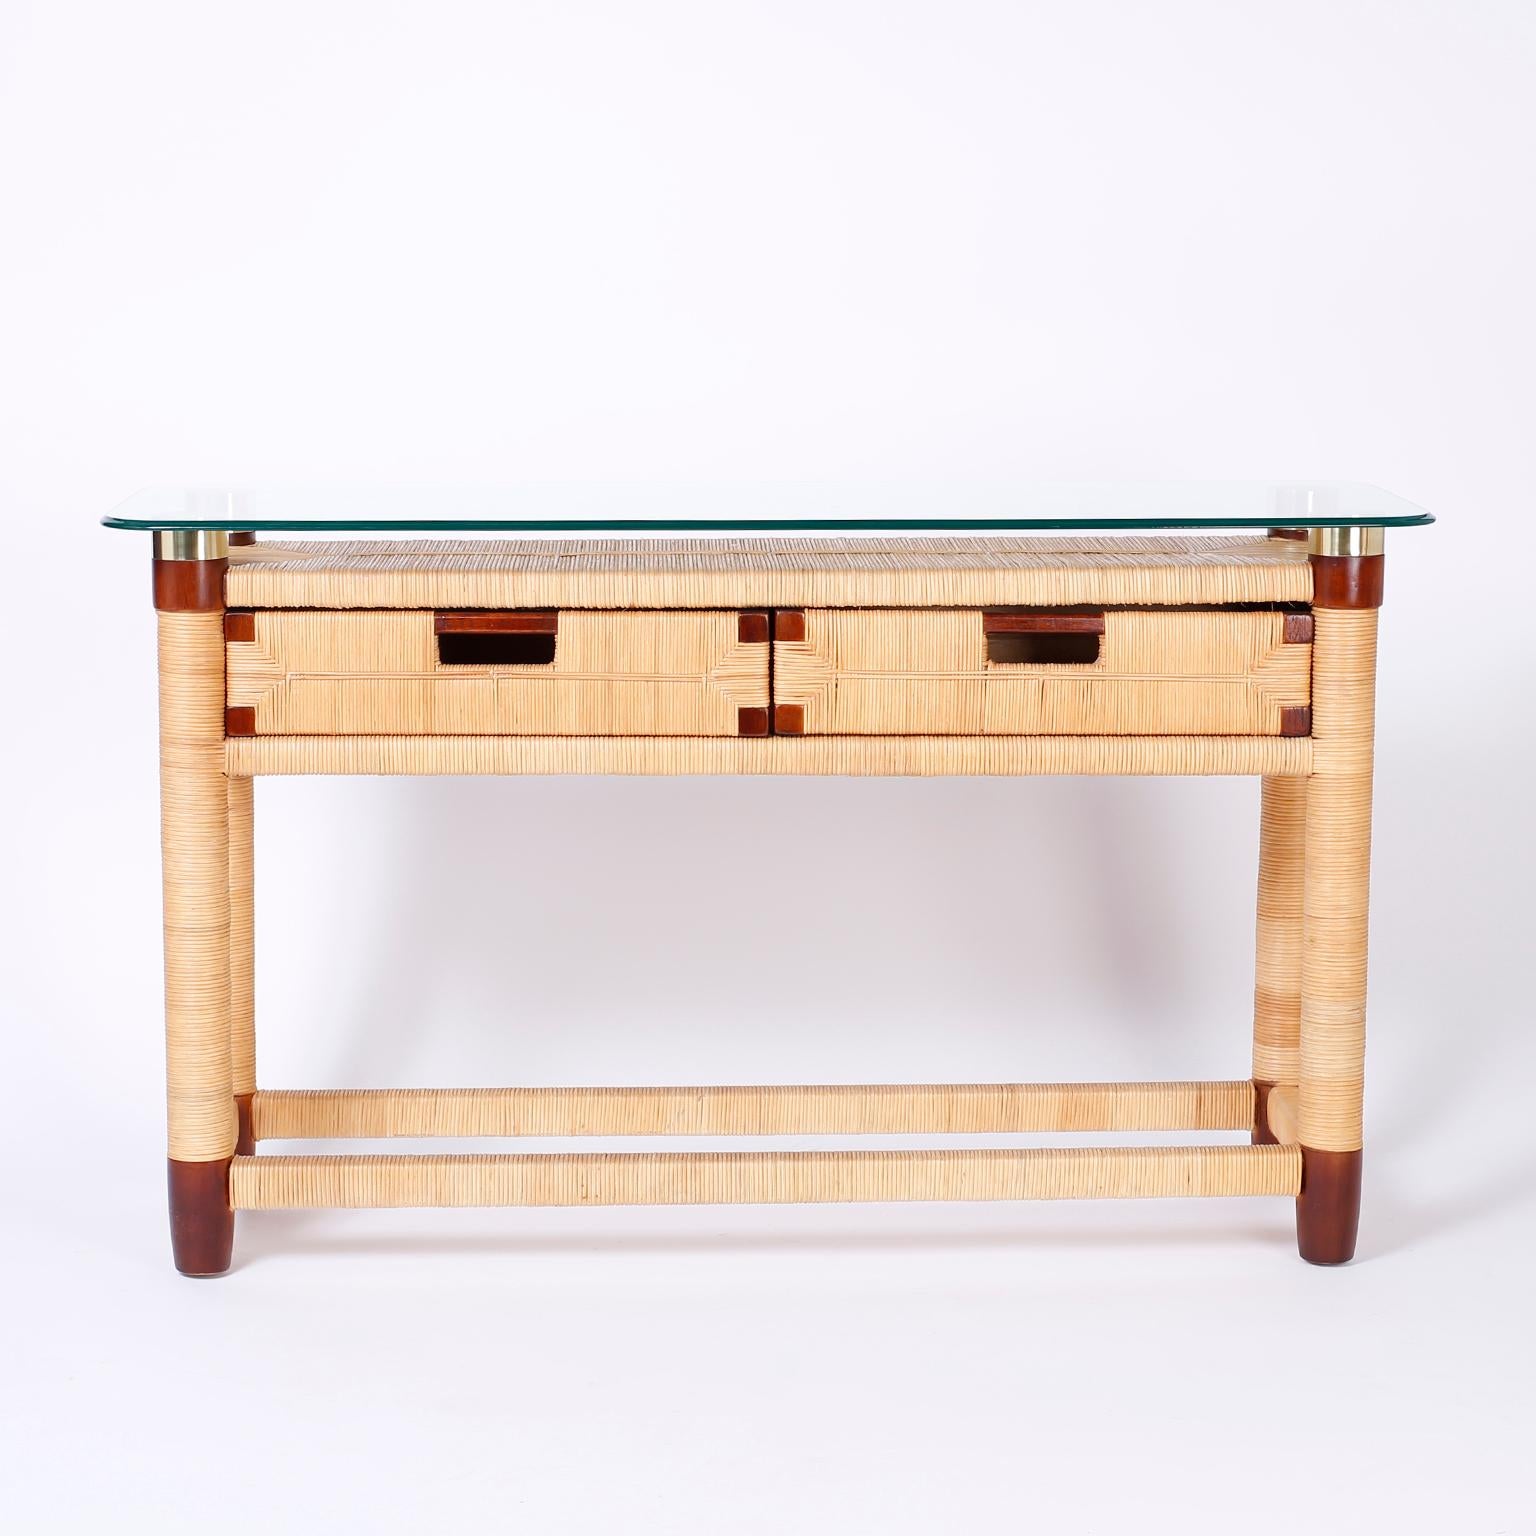 Two-drawer beveled glass top console table by Donghia, with a sleek modern form, a wood frame wrapped with reed, brass capped posts, and mahogany accents including drawer handles and turned feet.